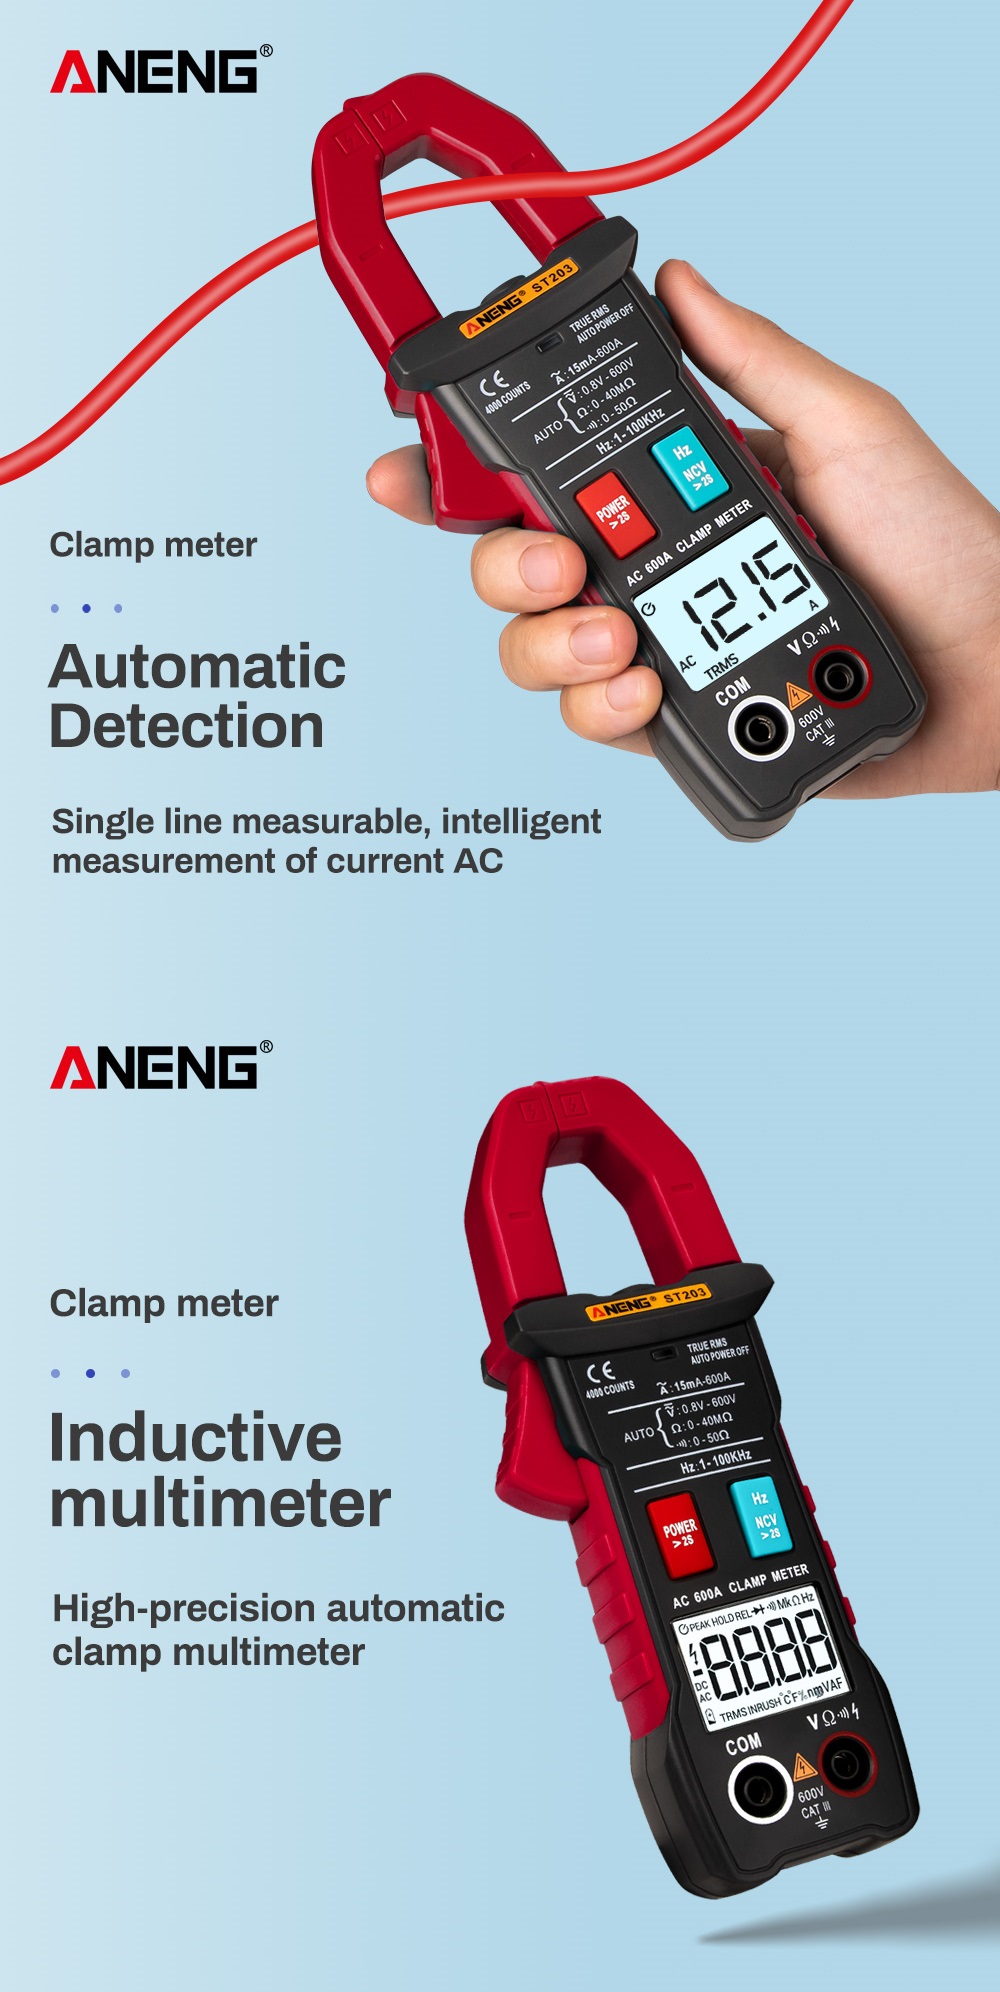 ANENG-ST203-4000-Counts-Full-Intelligent-Automatic-Range-True-RMS-Digital-Multimeter-Clamp-Meter-ACD-1503938-2